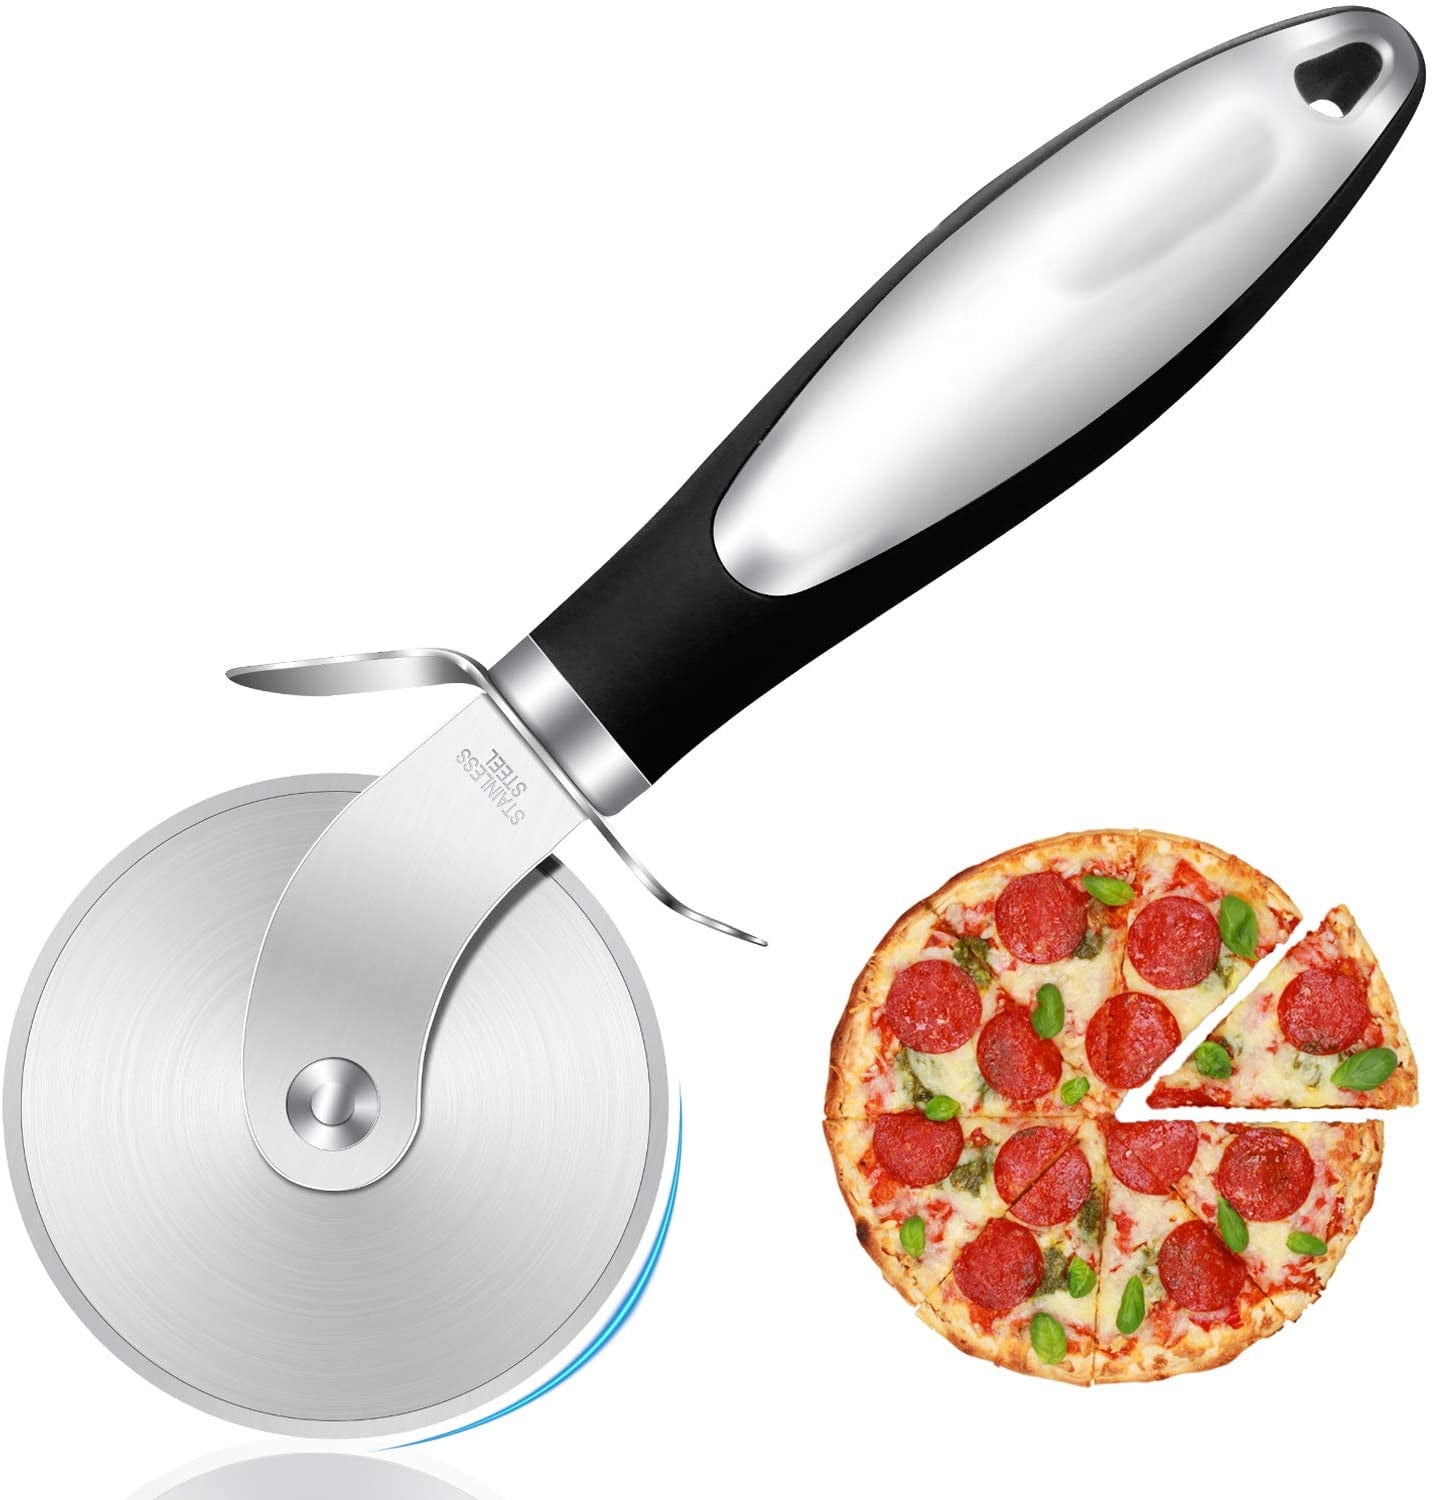 Circular Rolling Slicer Kitchen Cutter Food Vegetable Pizza Chopper Tool 8C